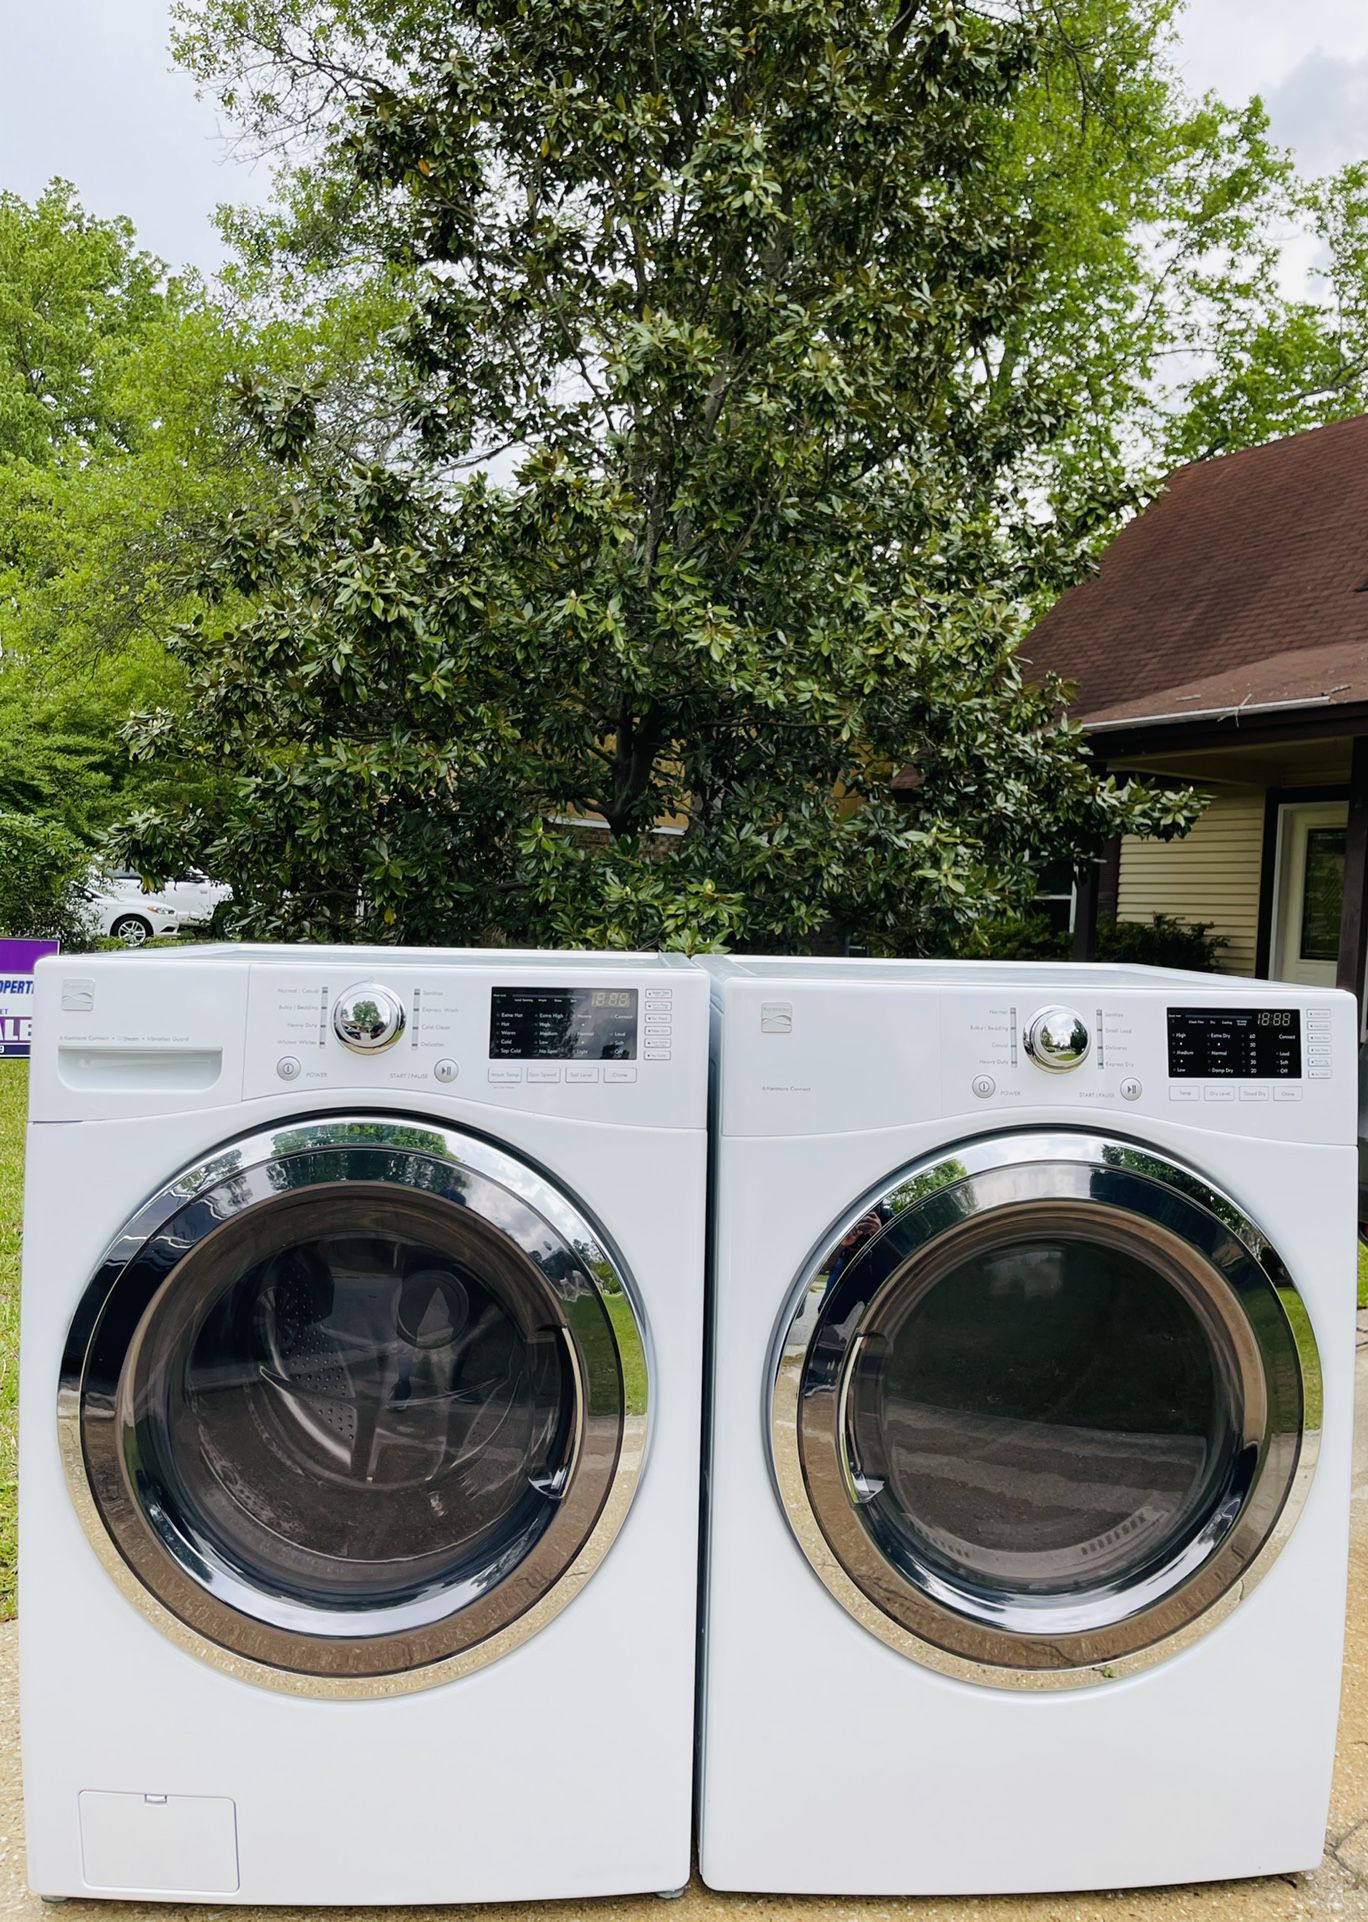 Barely🌊 Brand New Matching Kenmore Frontloader Washer and Dryer Set Available 🌊